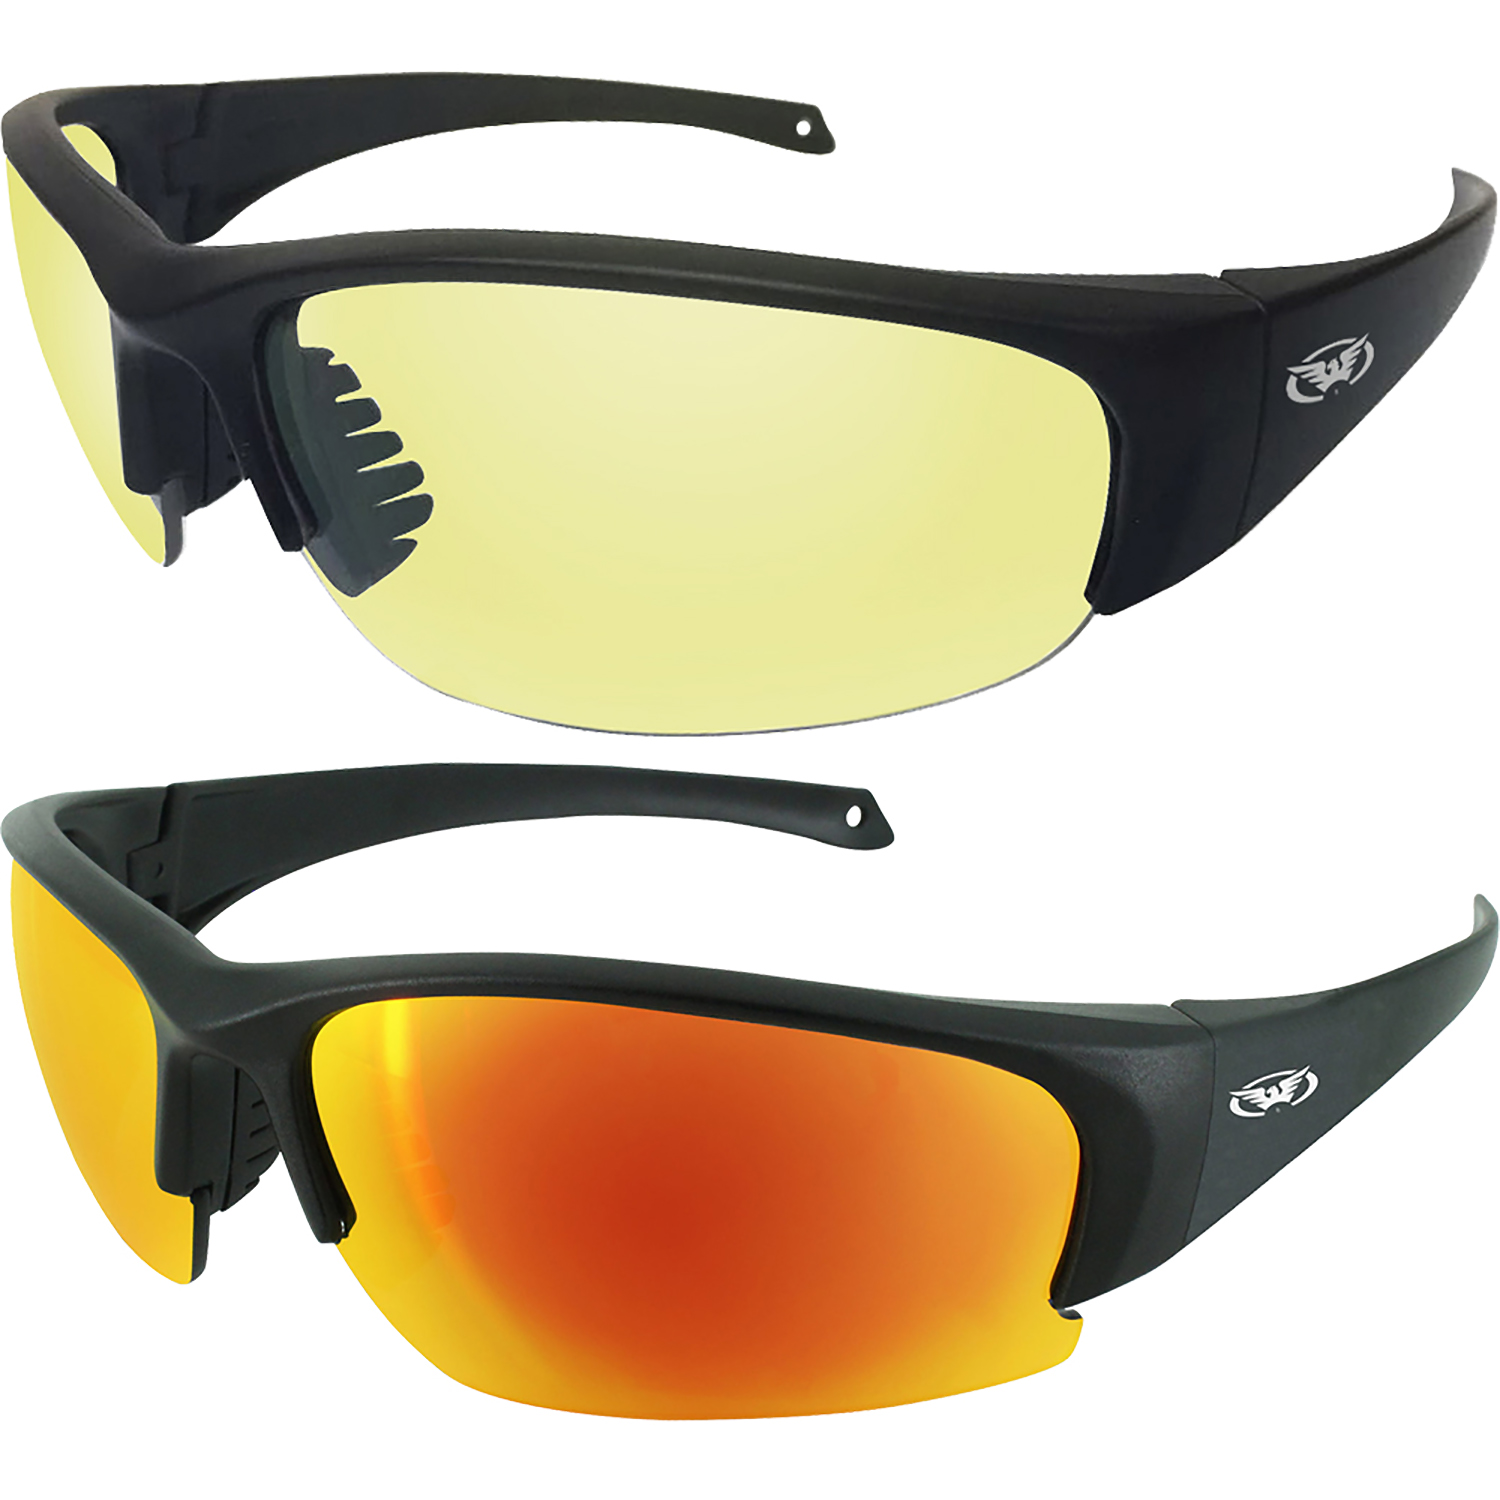 2 Pairs of Global Vision Eyewear Eyedol Motorcycle Safety Sunglasses Black Frames Yellow + G Tech Red Mirror Lenses - image 1 of 3